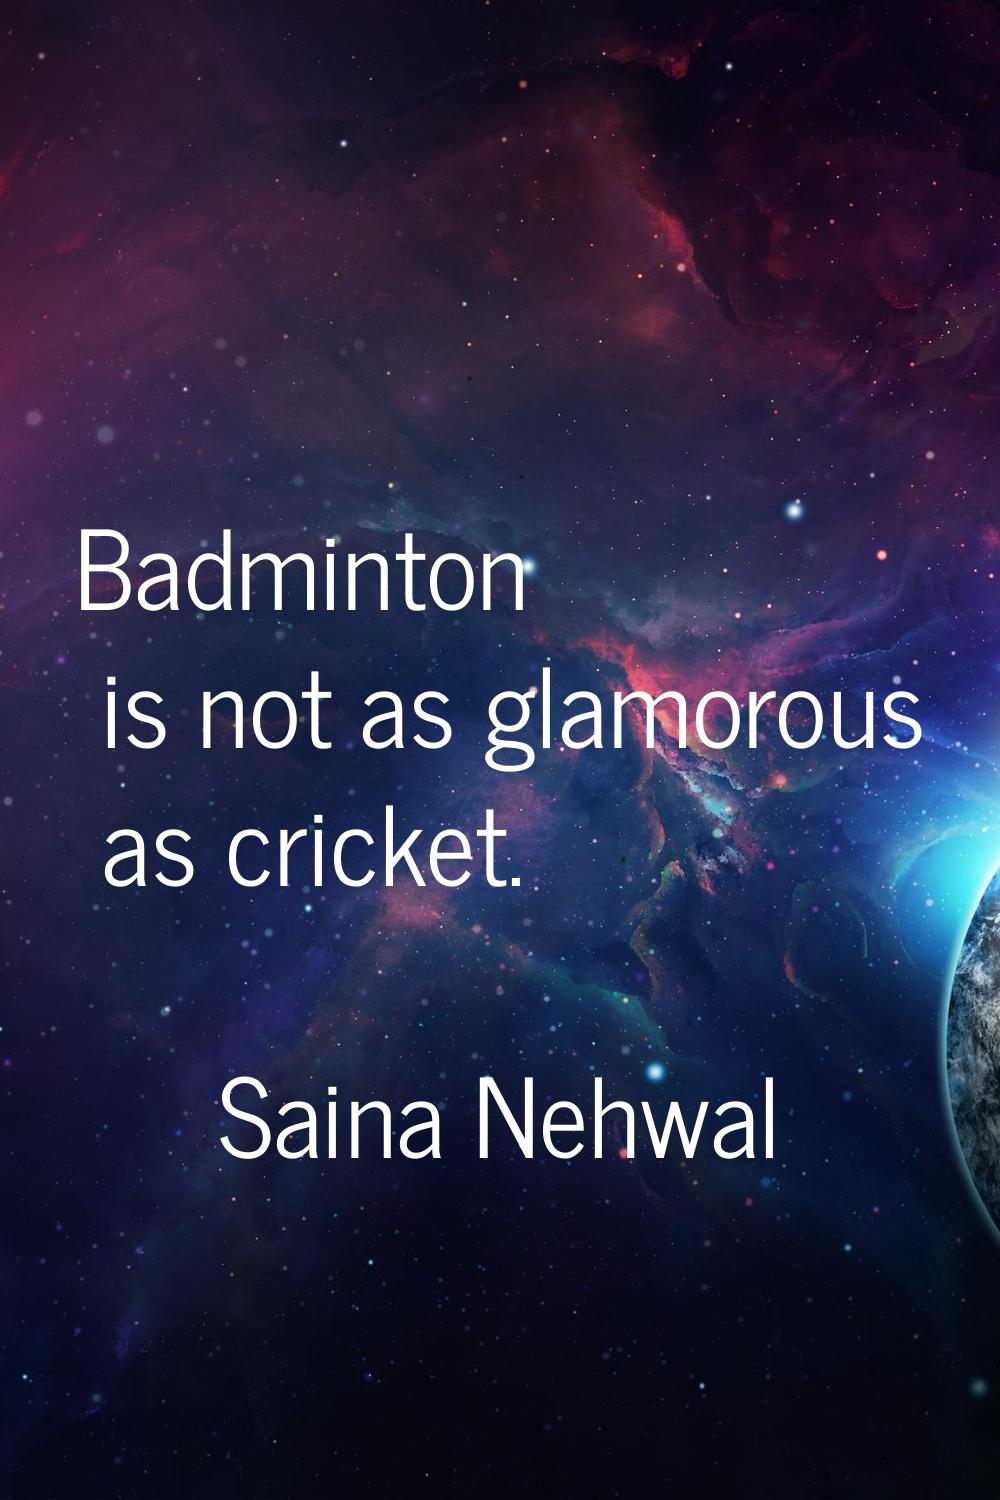 Badminton is not as glamorous as cricket.